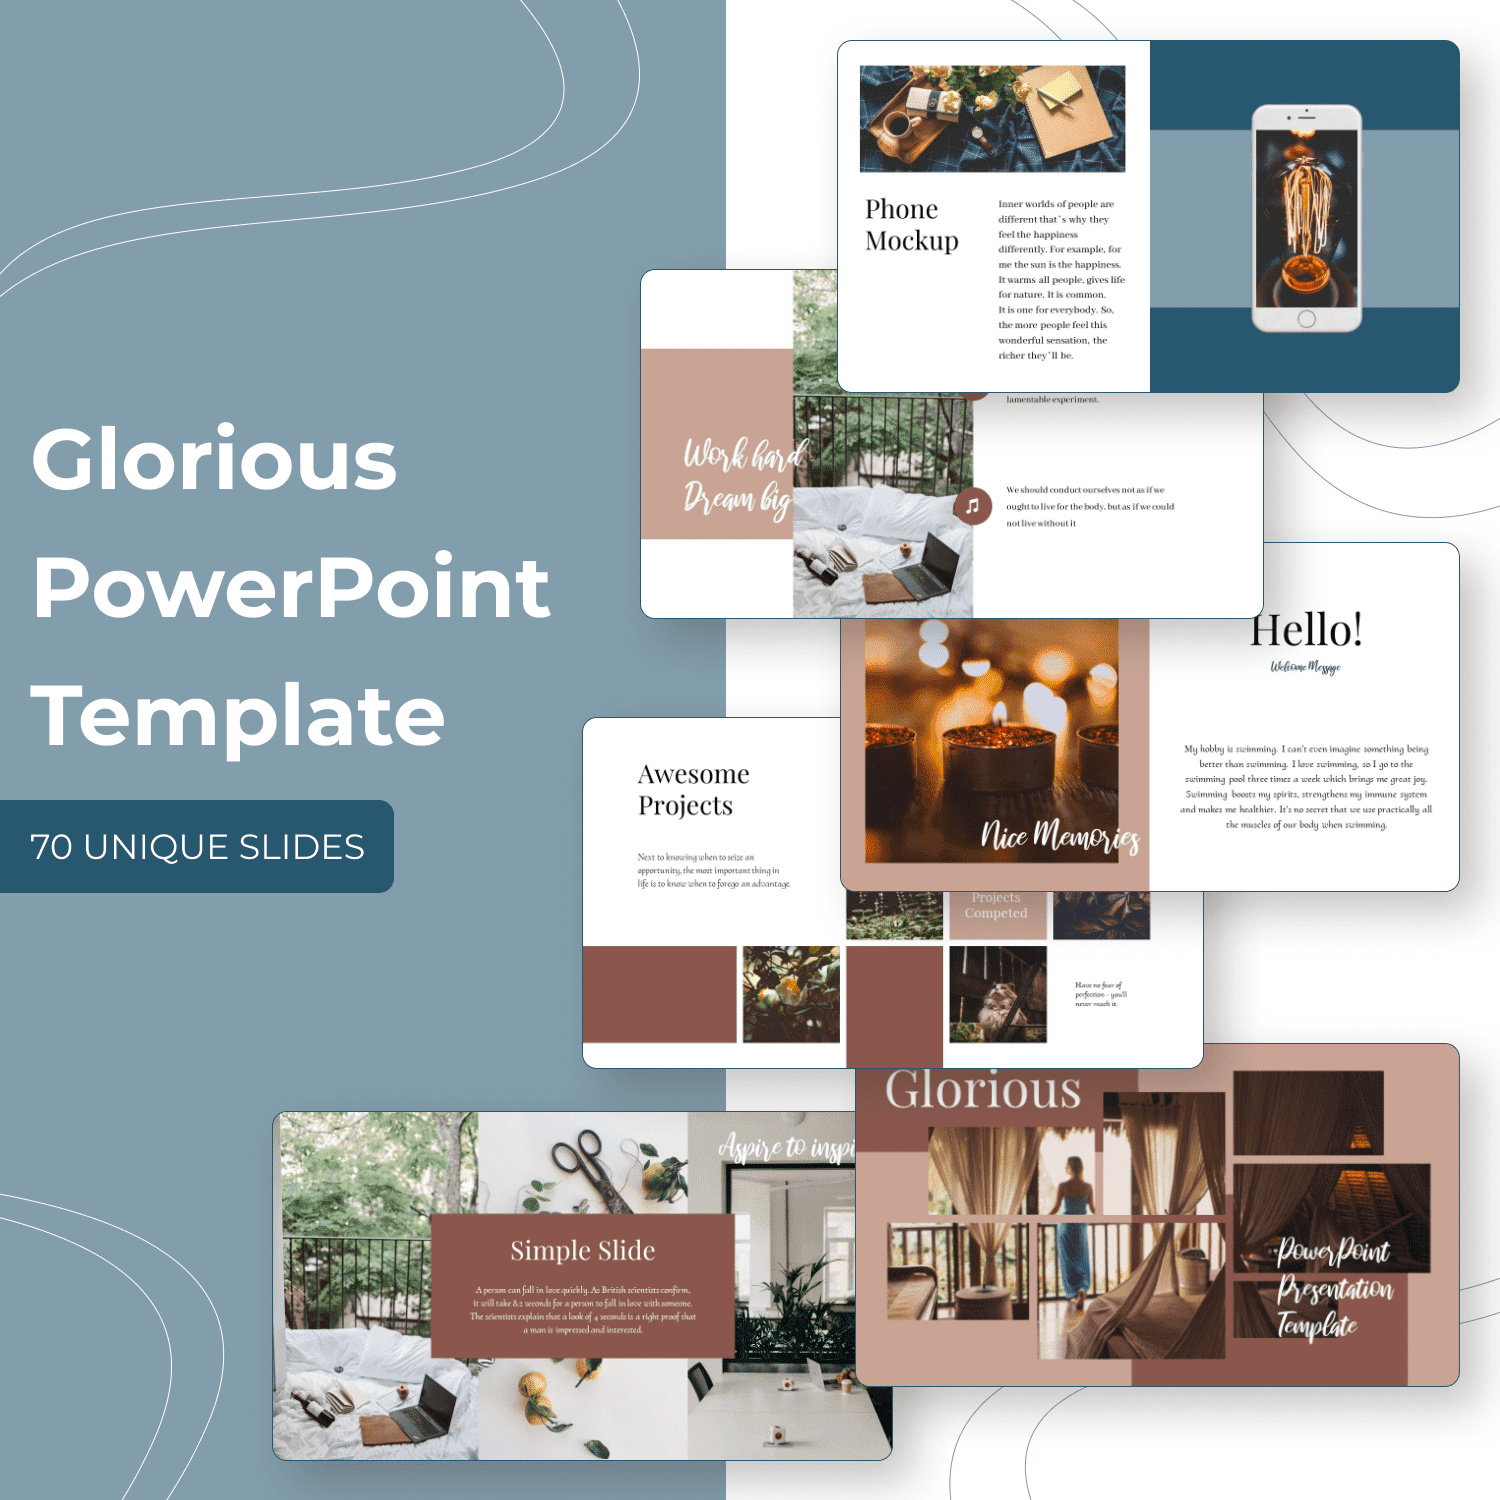 MAON - Powerpoint Template